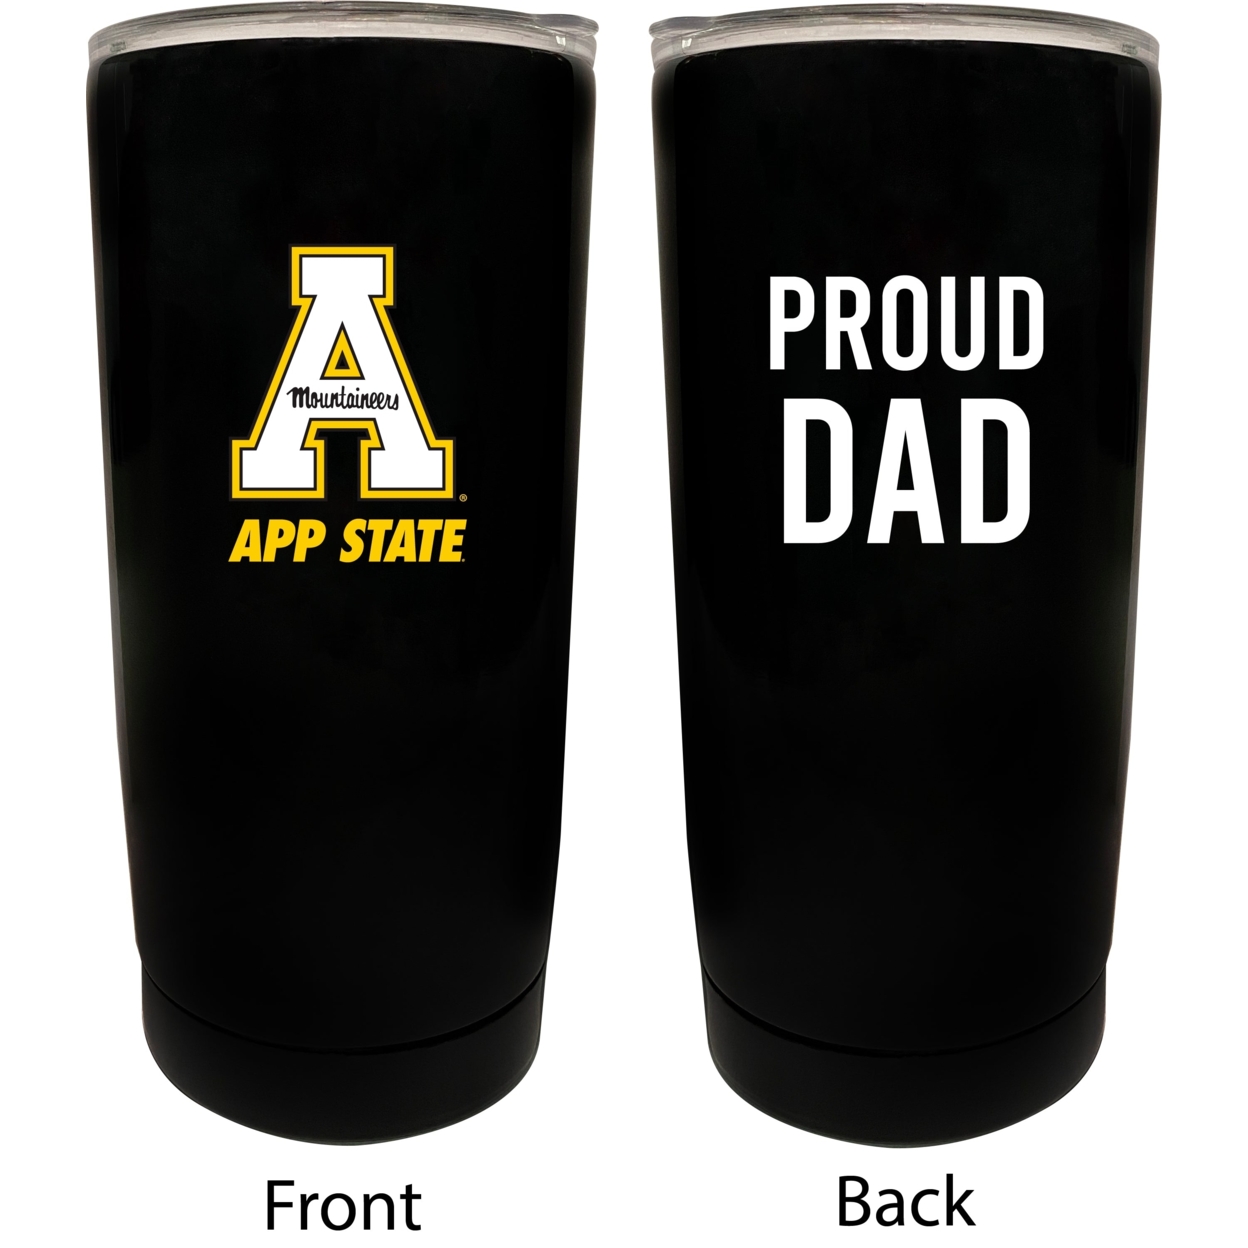 Appalachian State Proud Dad 16 Oz Insulated Stainless Steel Tumblers